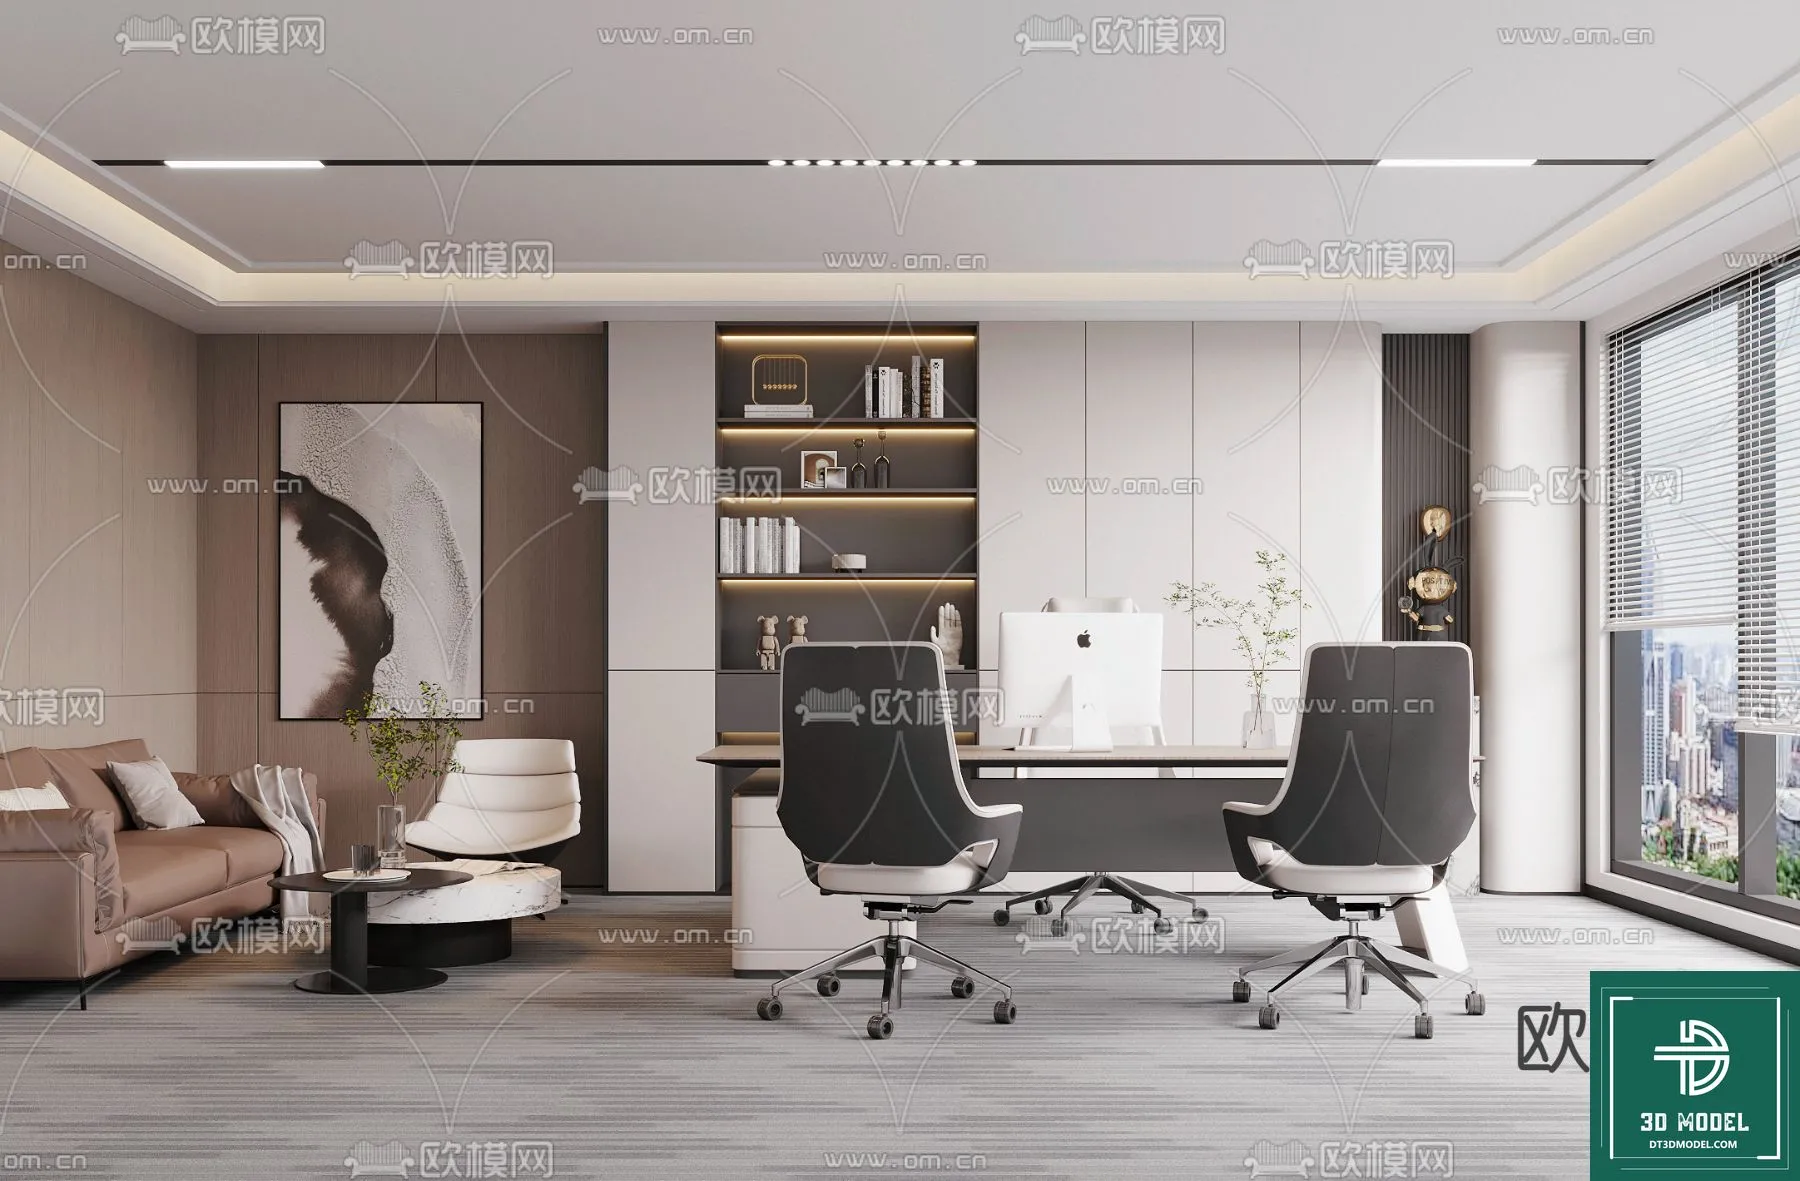 OFFICE ROOM FOR MANAGER – 3DMODEL – 071